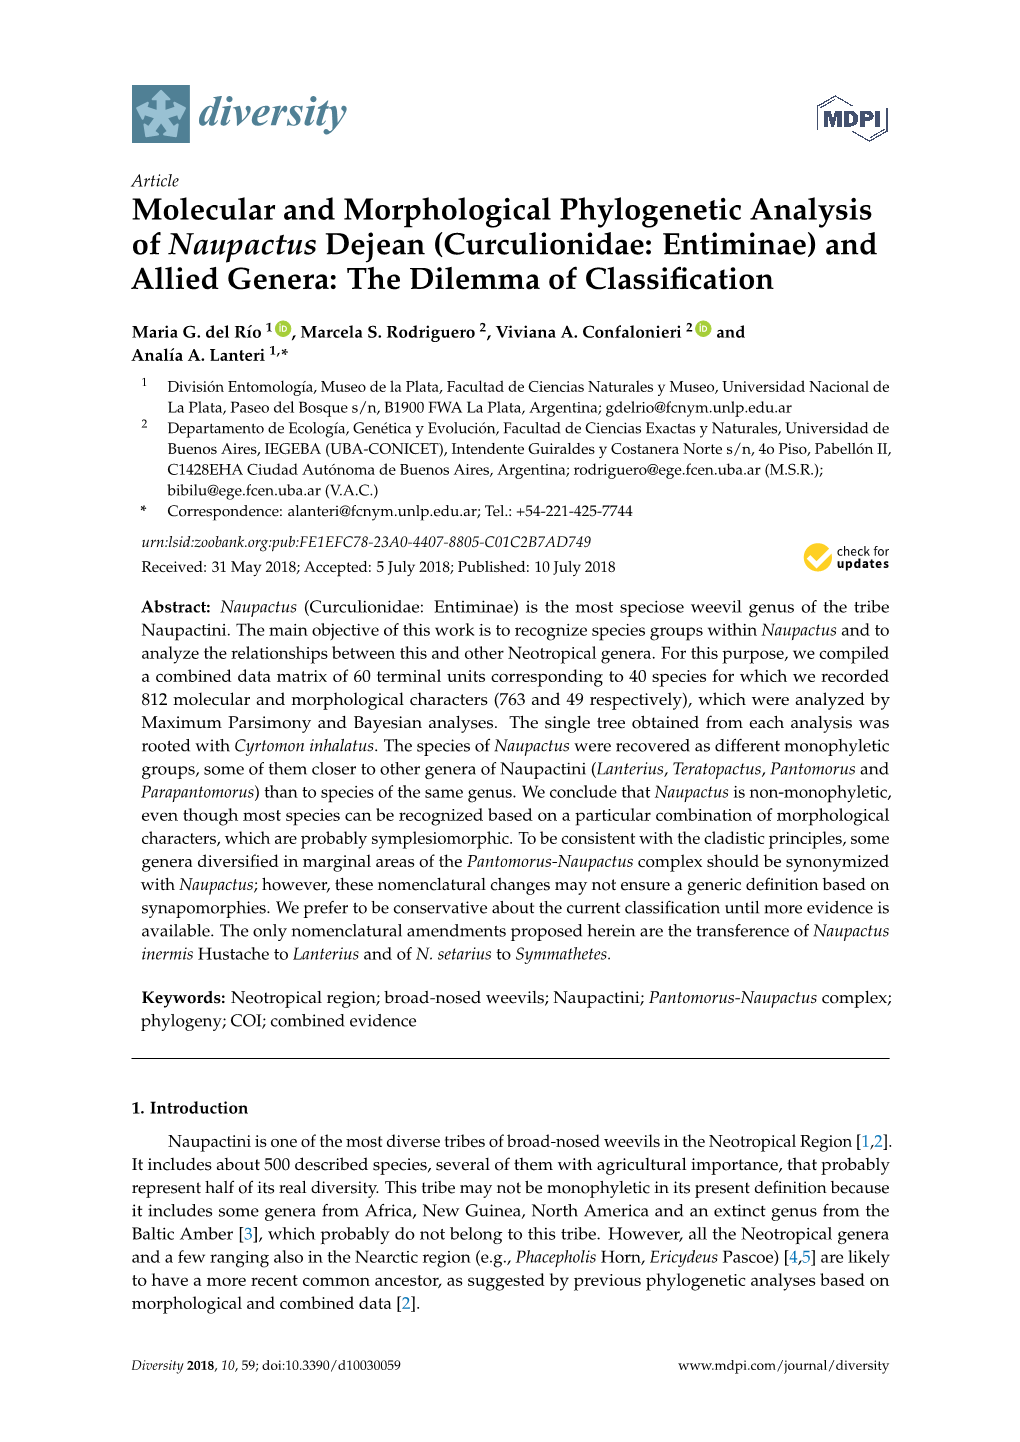 Molecular and Morphological Phylogenetic Analysis of Naupactus Dejean (Curculionidae: Entiminae) and Allied Genera: the Dilemma of Classiﬁcation